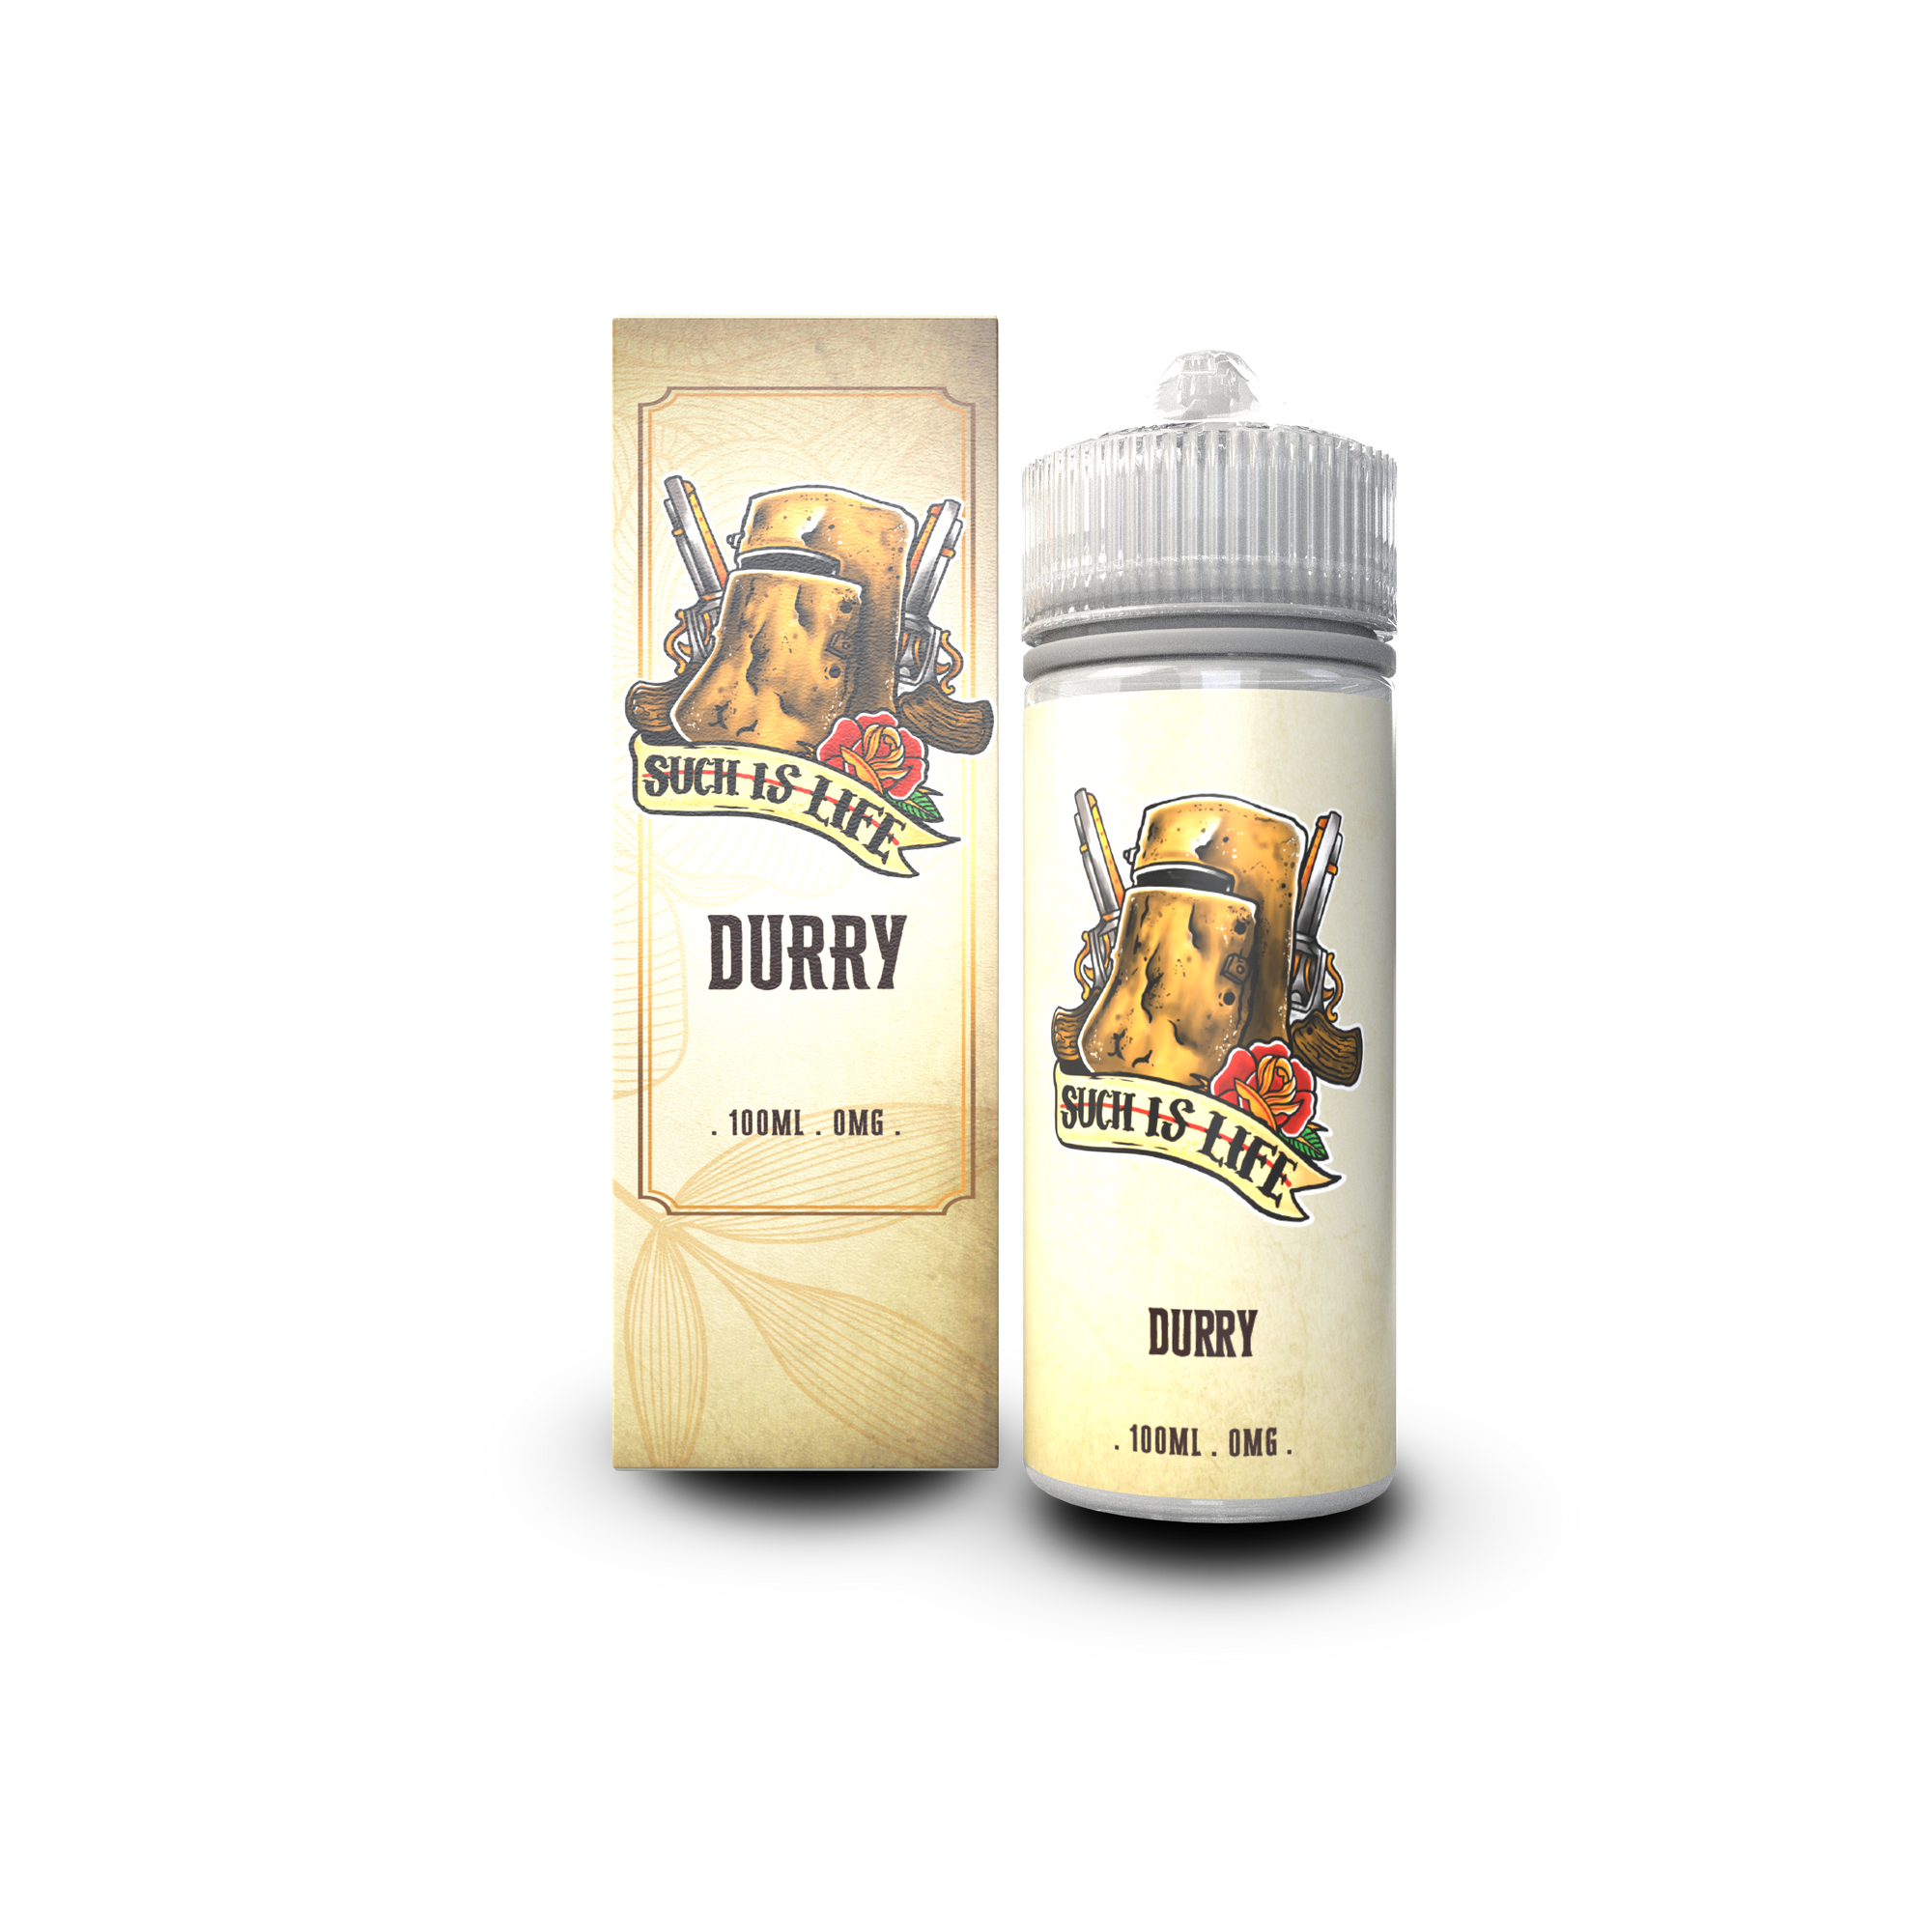 Buy Durry By Such As Life Eliquids - Wick And Wire Co Melbourne Vape Shop, Victoria Australia